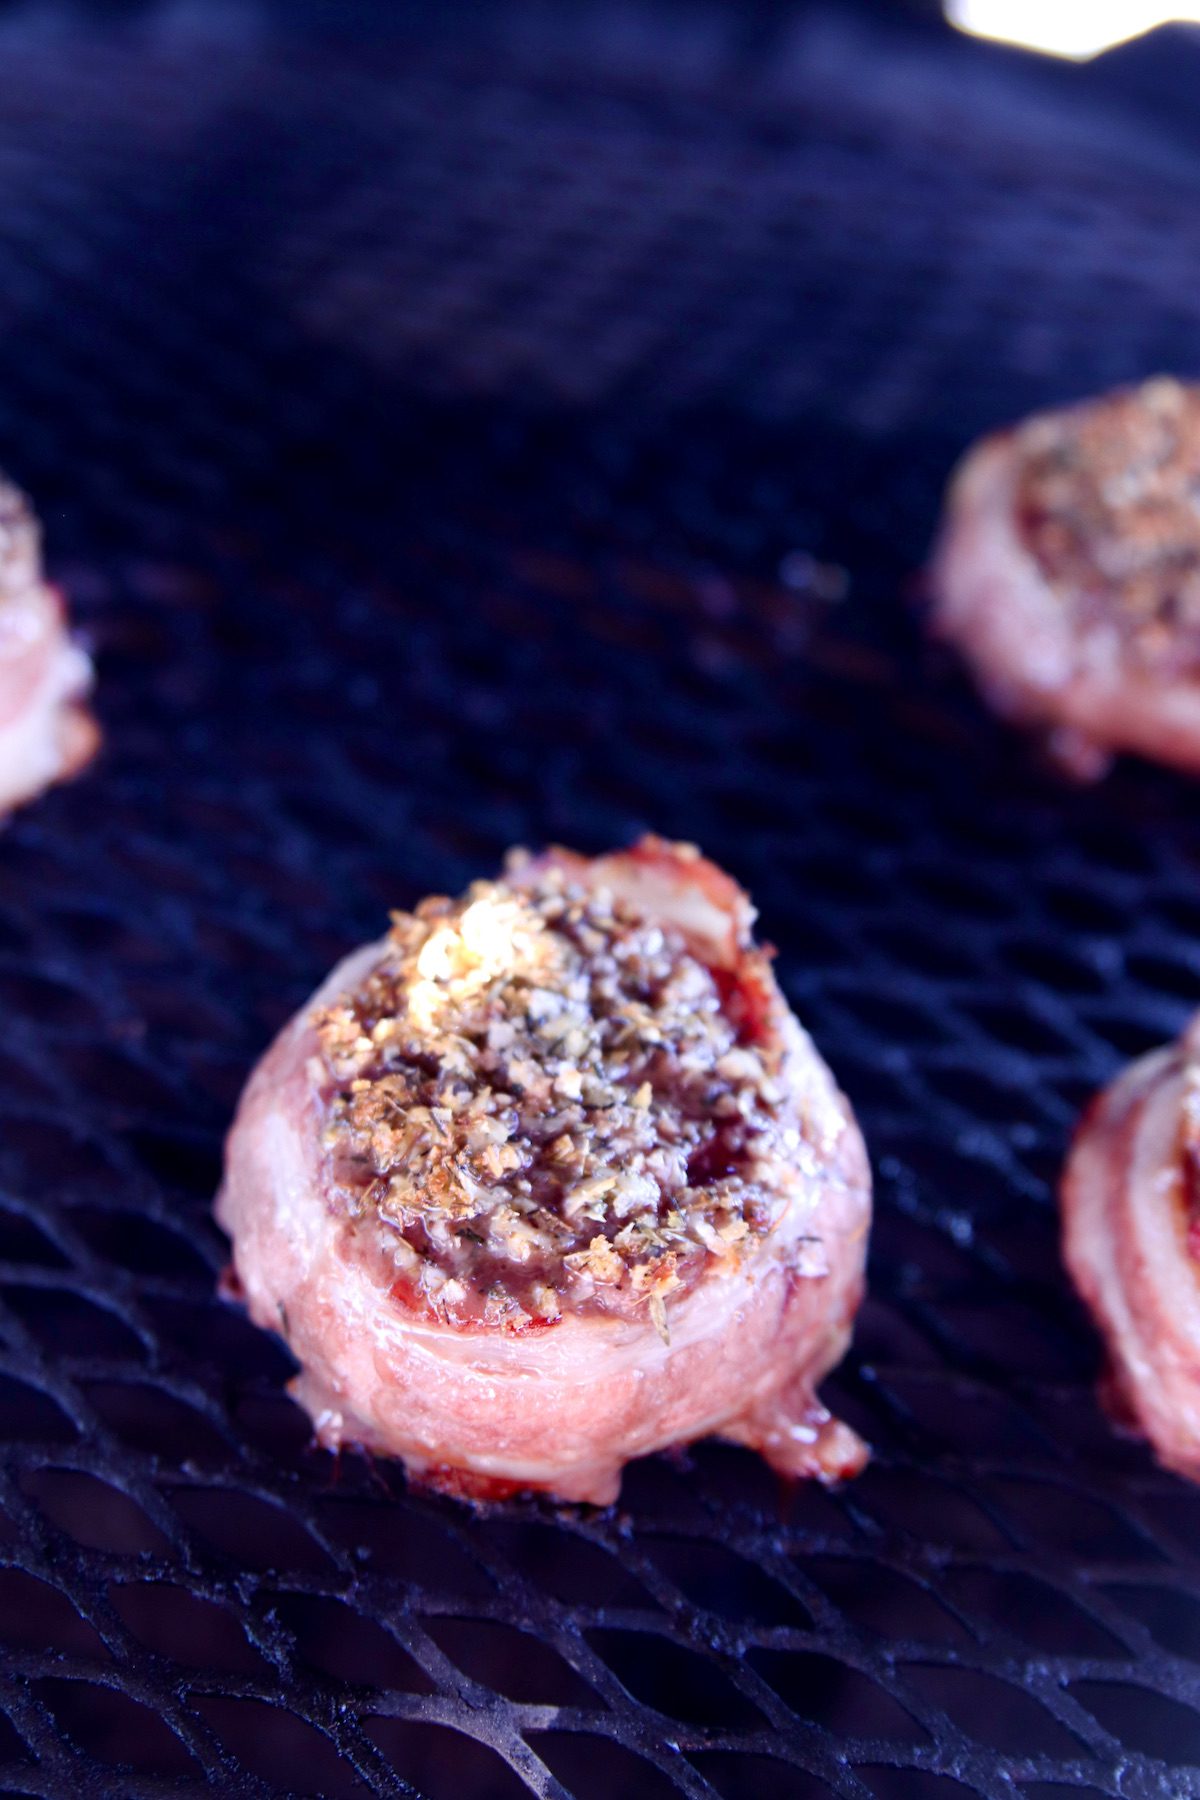 grilling filet mignon wrapped in bacon with parmesan crust